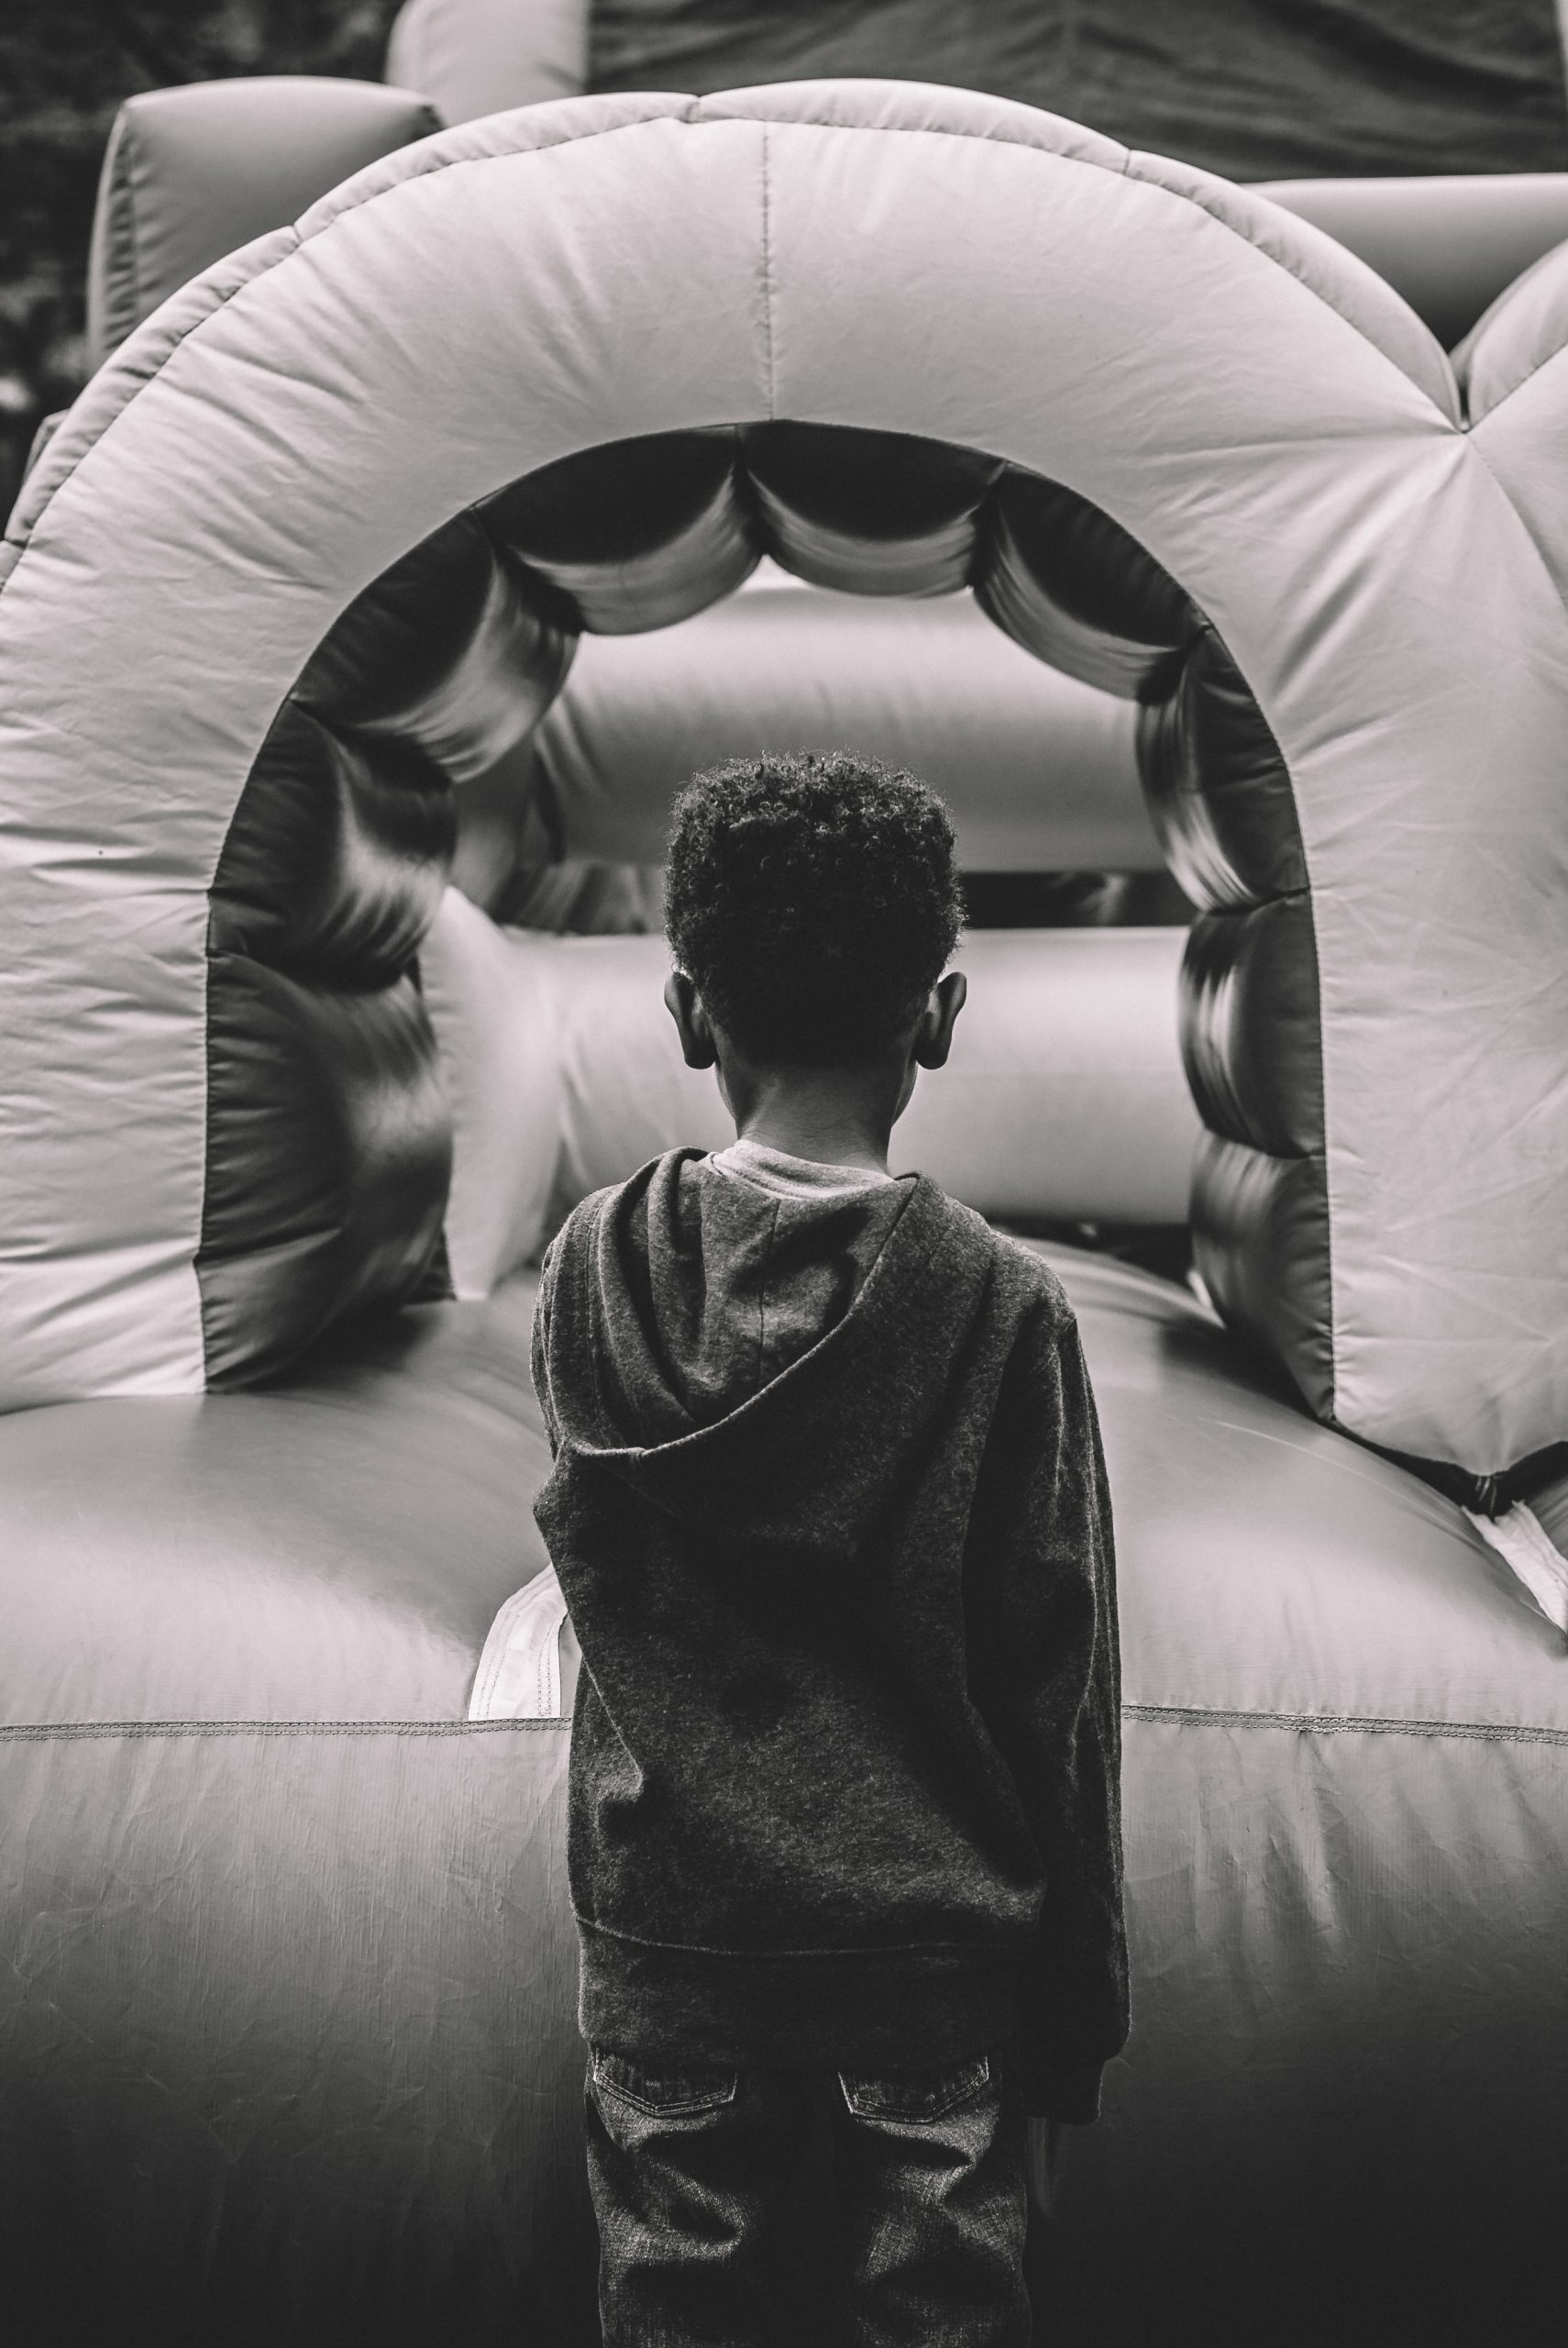 Bounce house rental in Charlotte